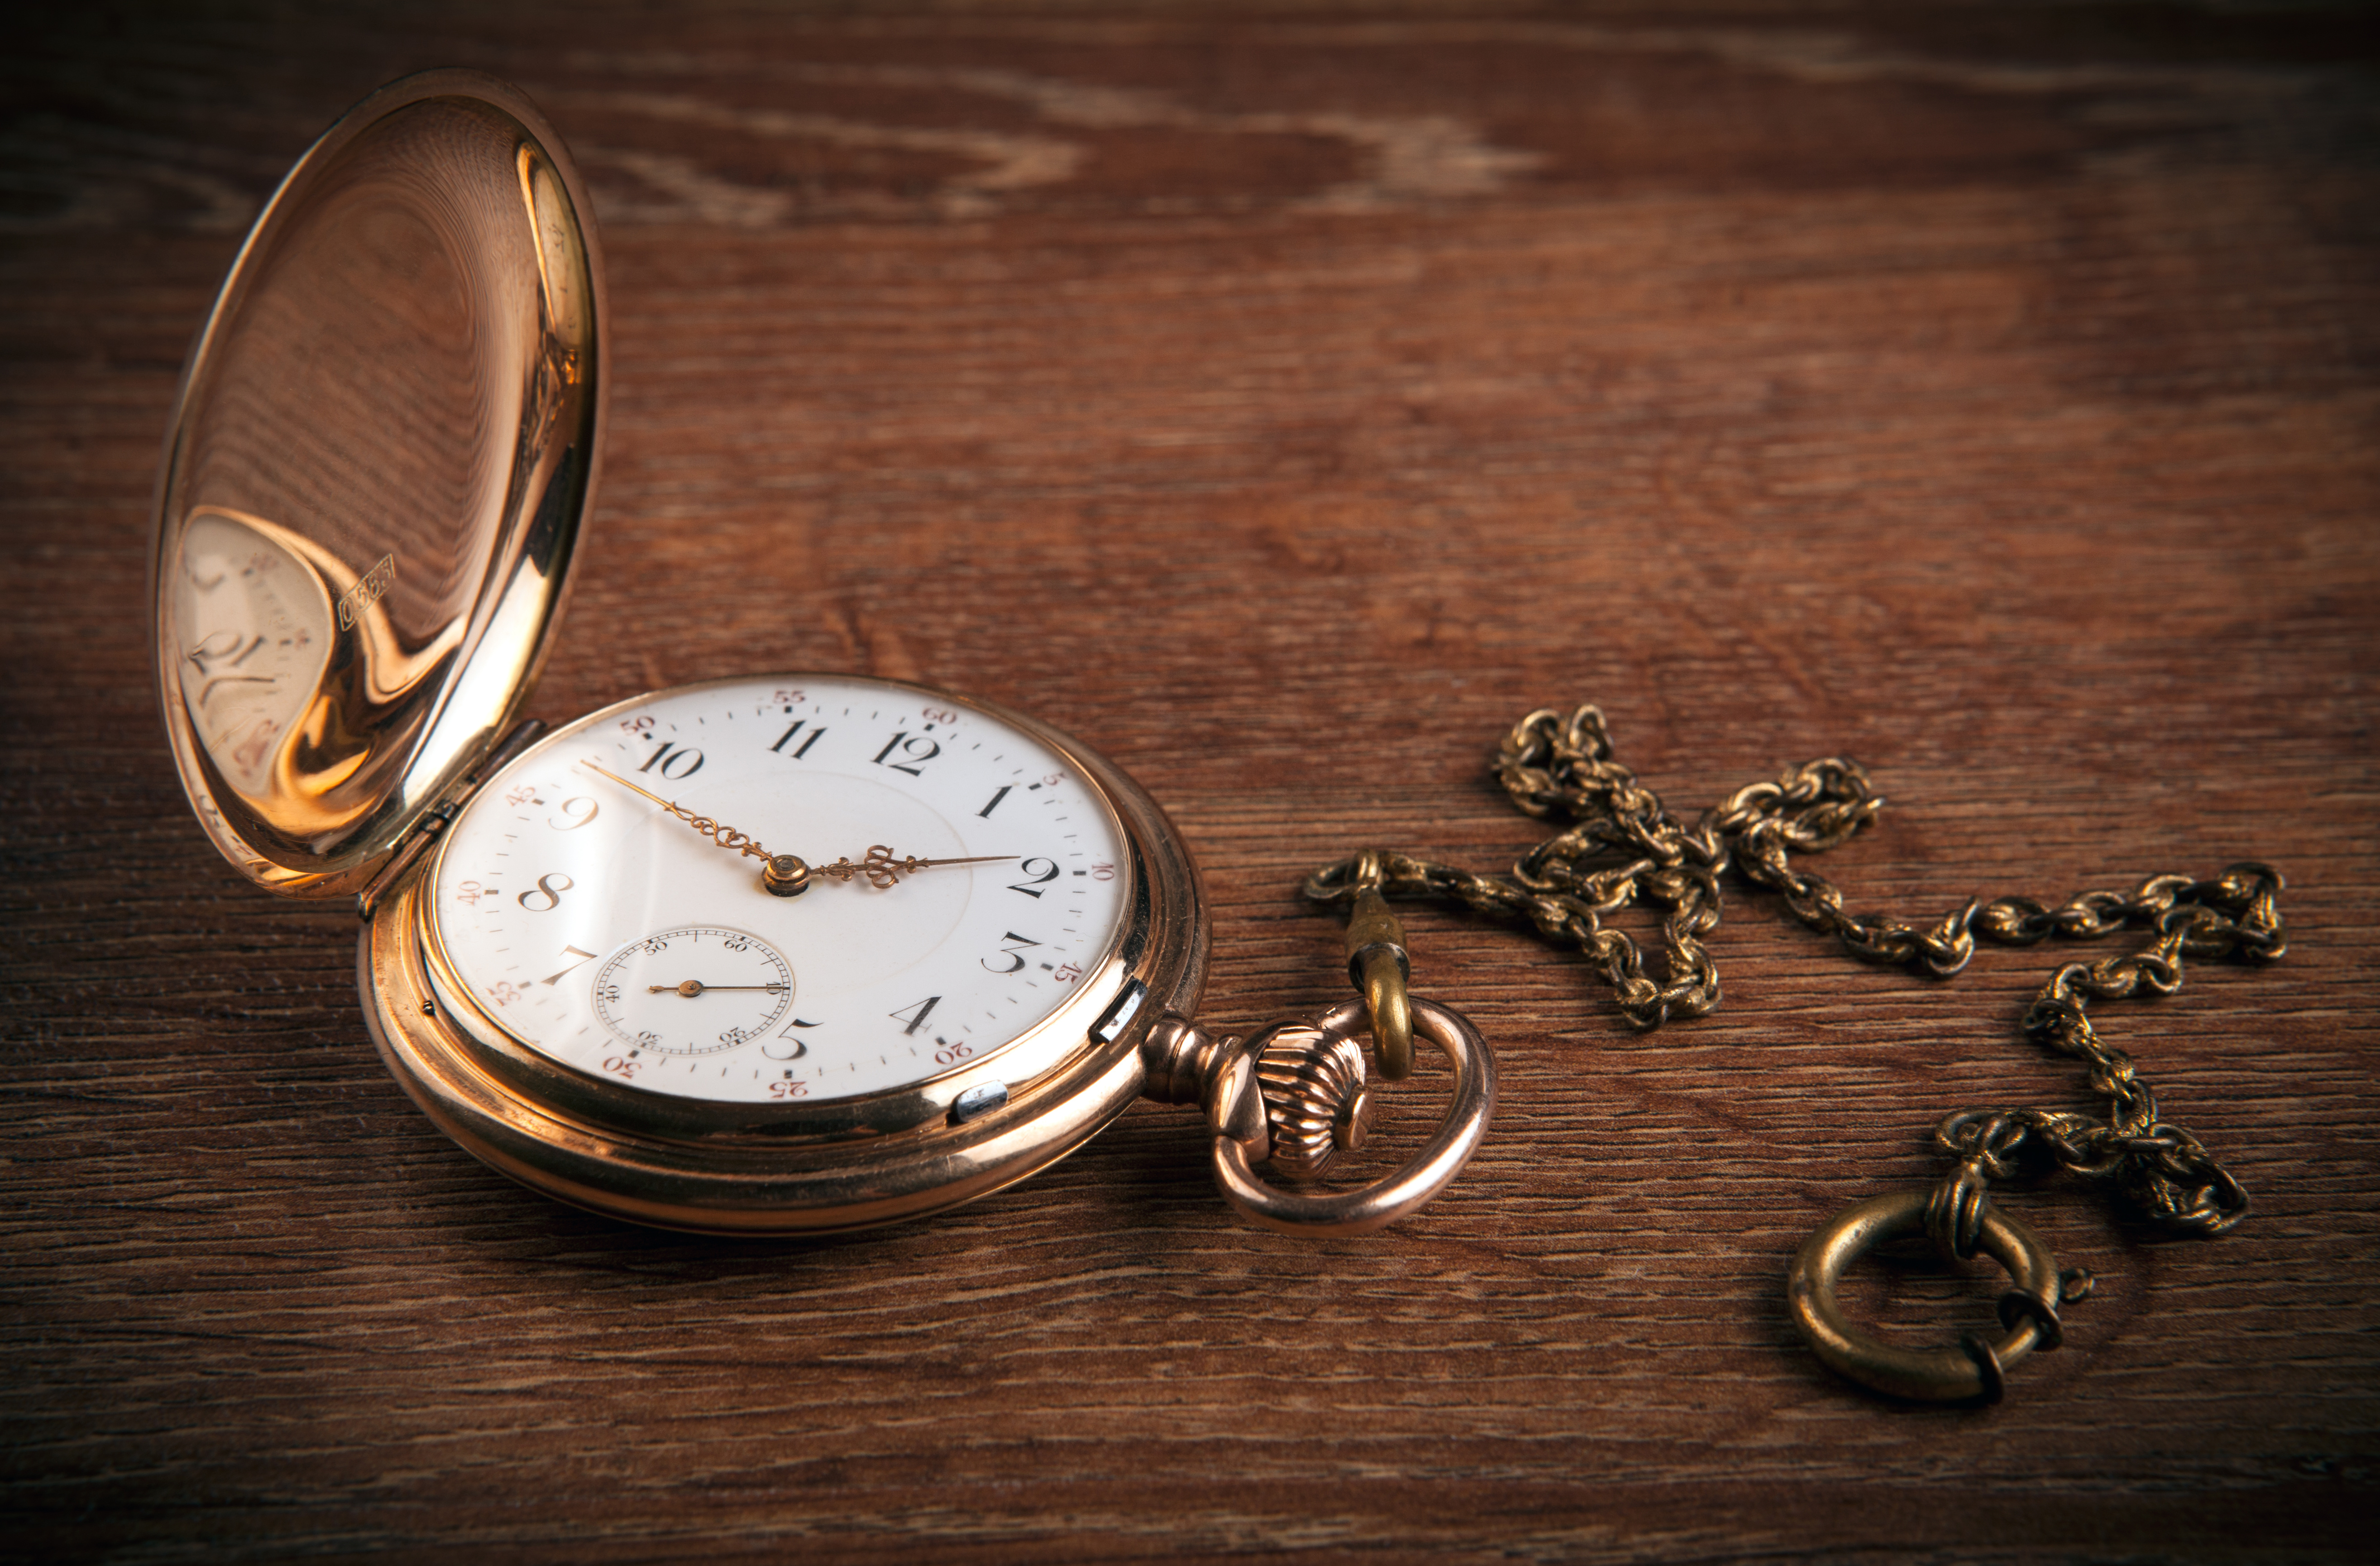 Antique Pocket Watch Value Photo Guide